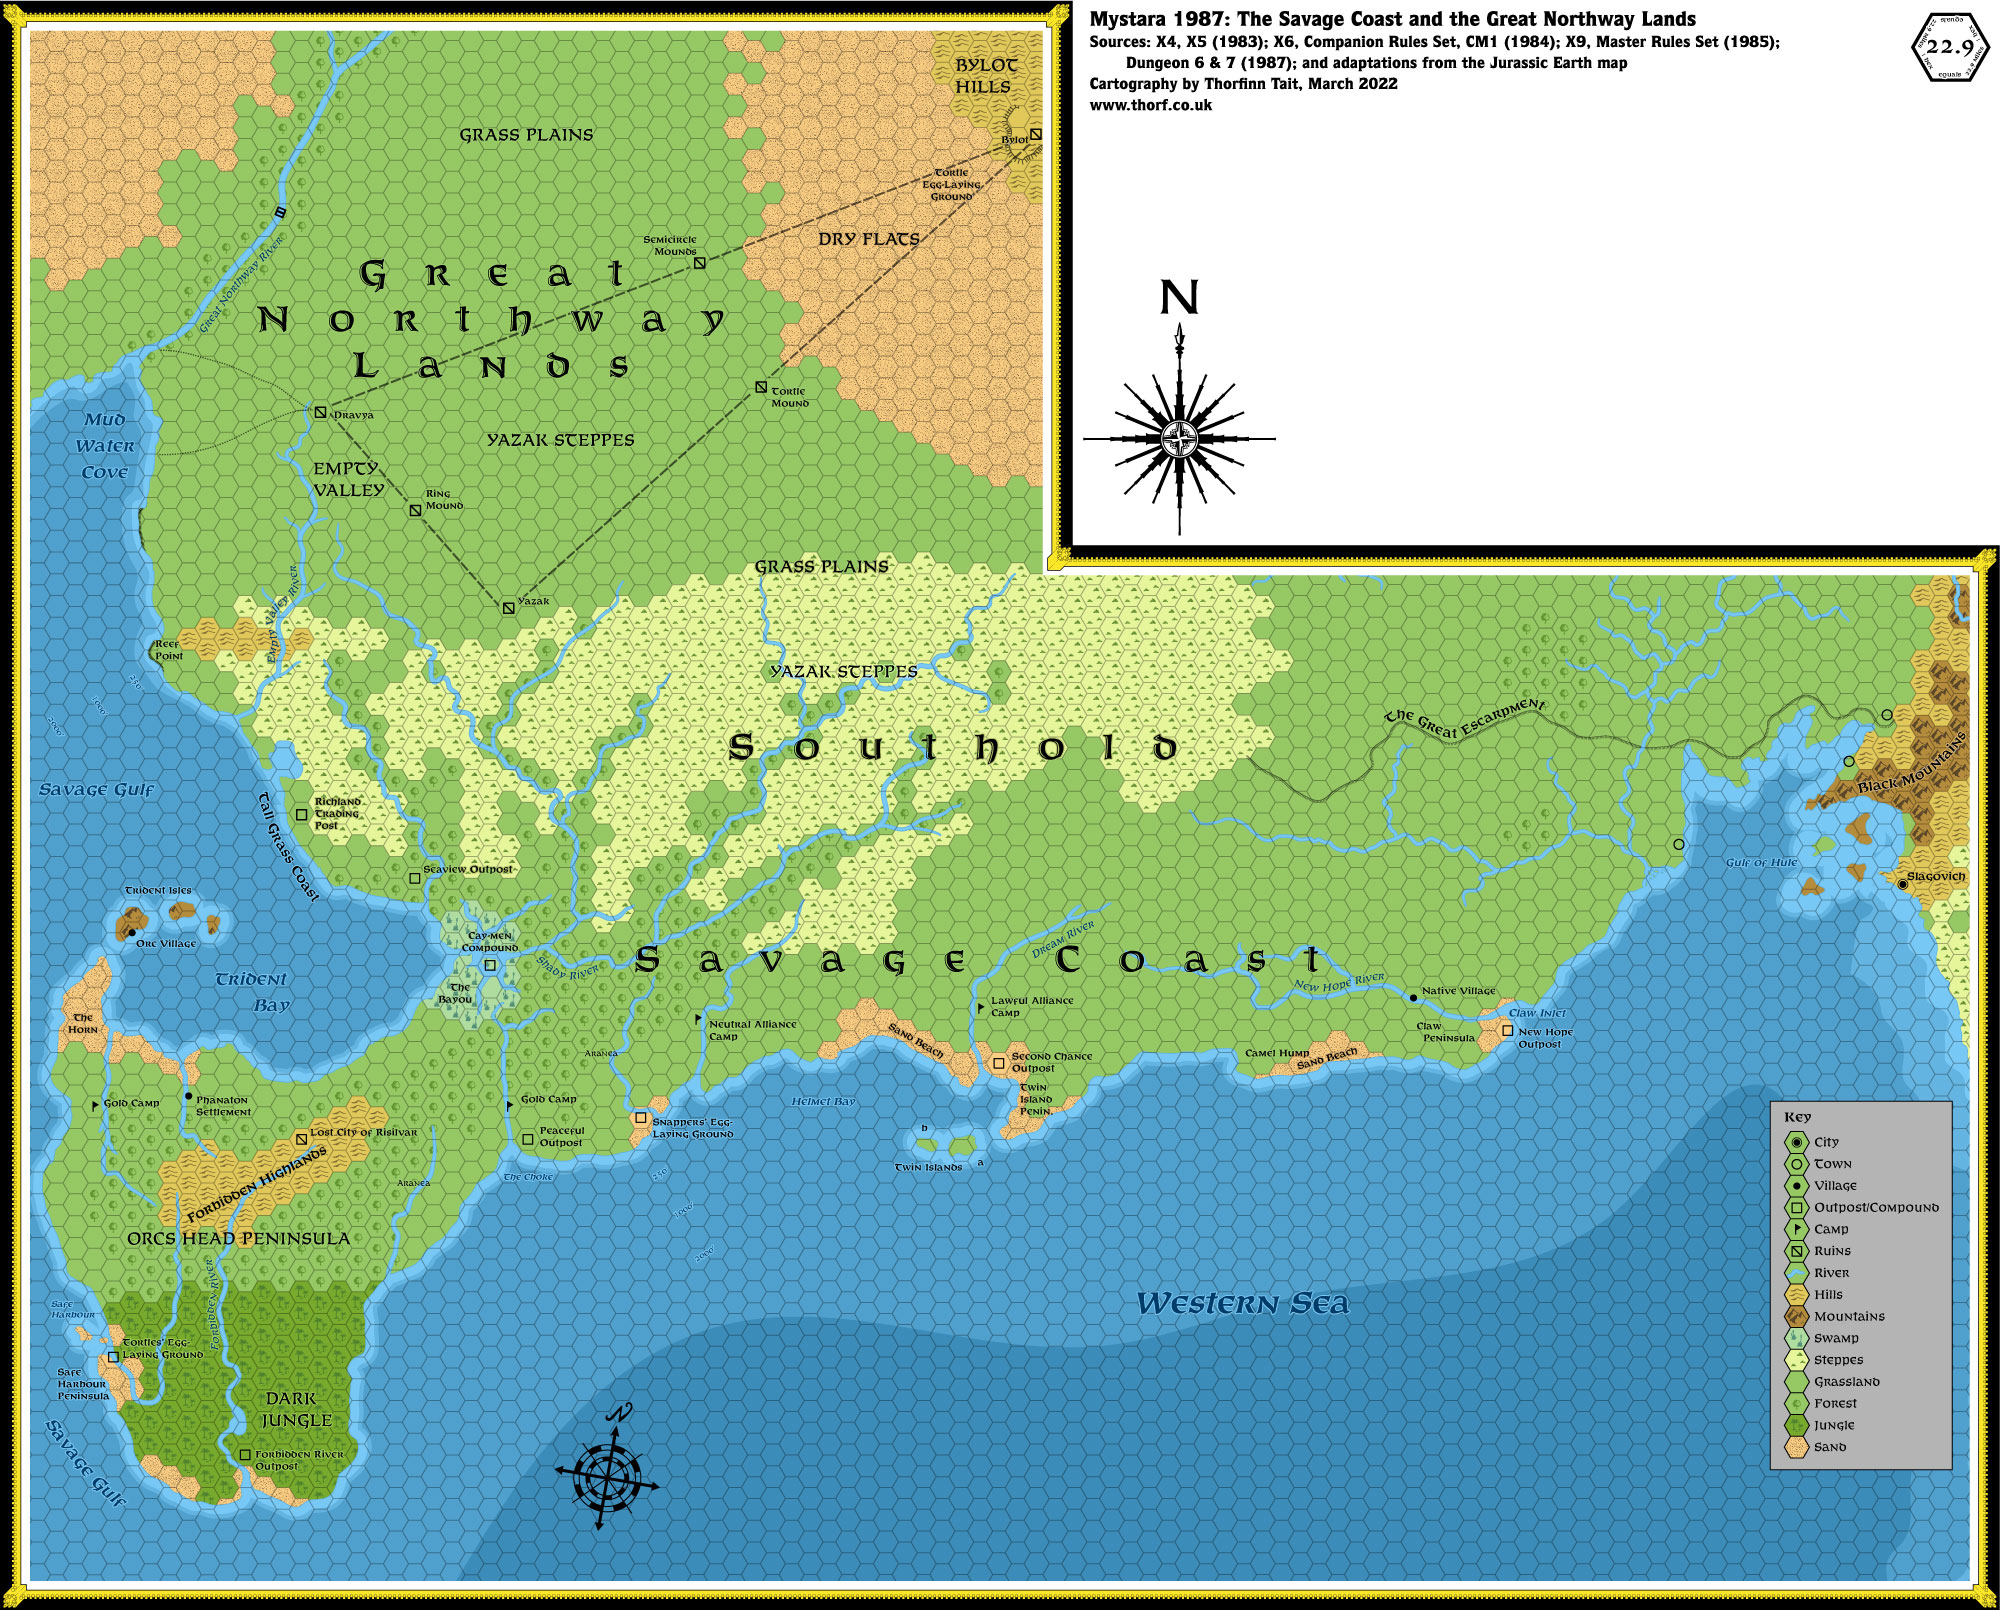 The Savage Coast and the Great Northway Lands, 22.9 miles per hex (1987)